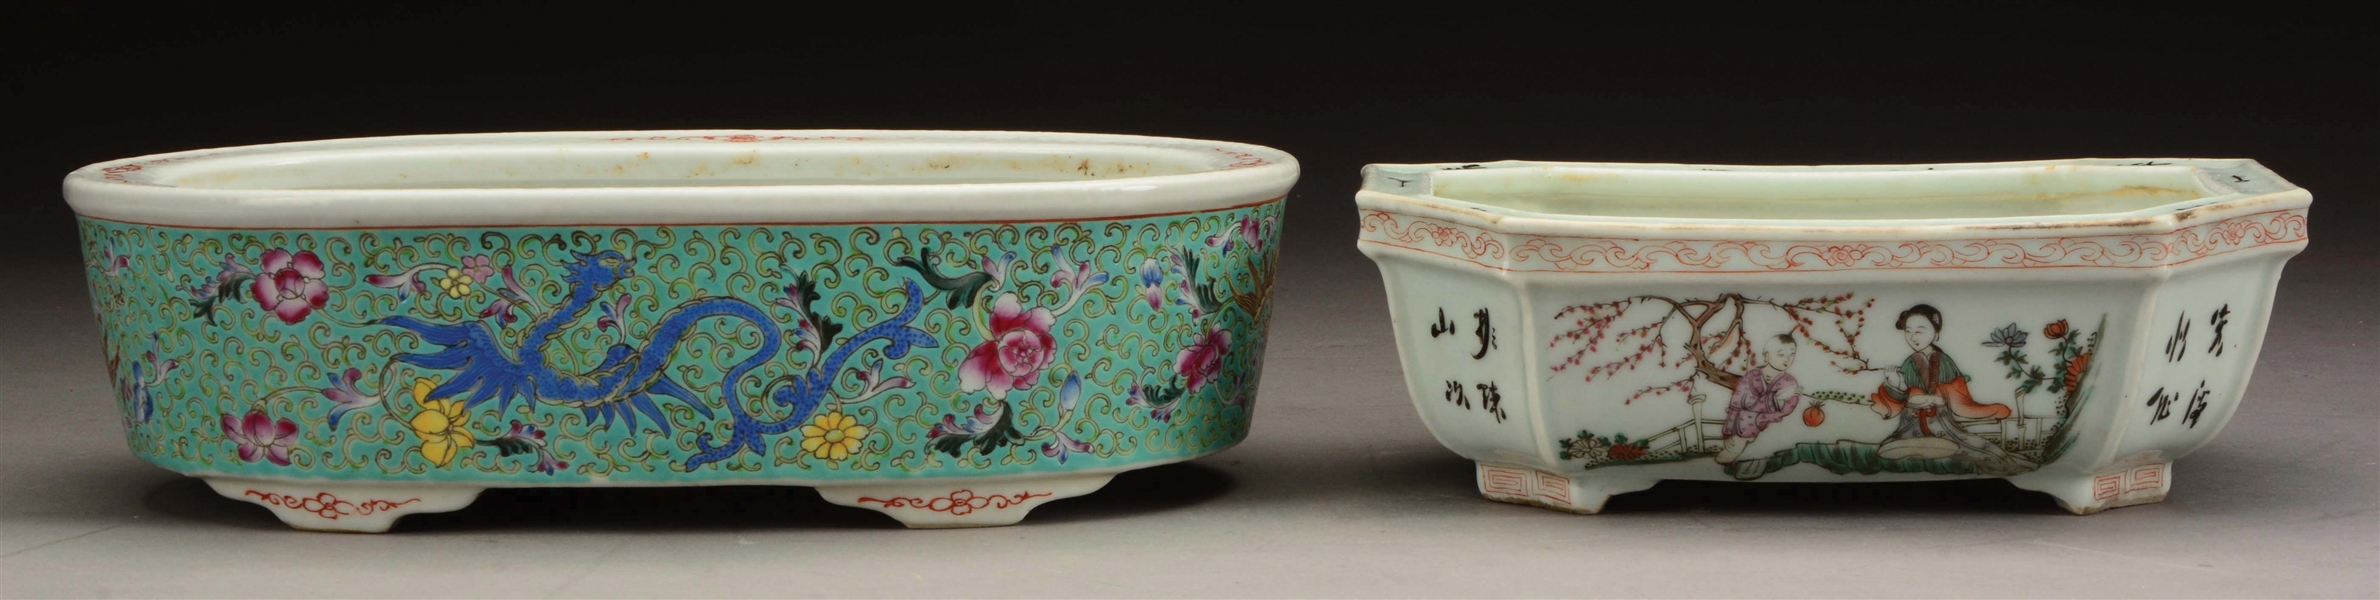 LOT OF 2: CHINESE PORCELAIN PLANTERS.